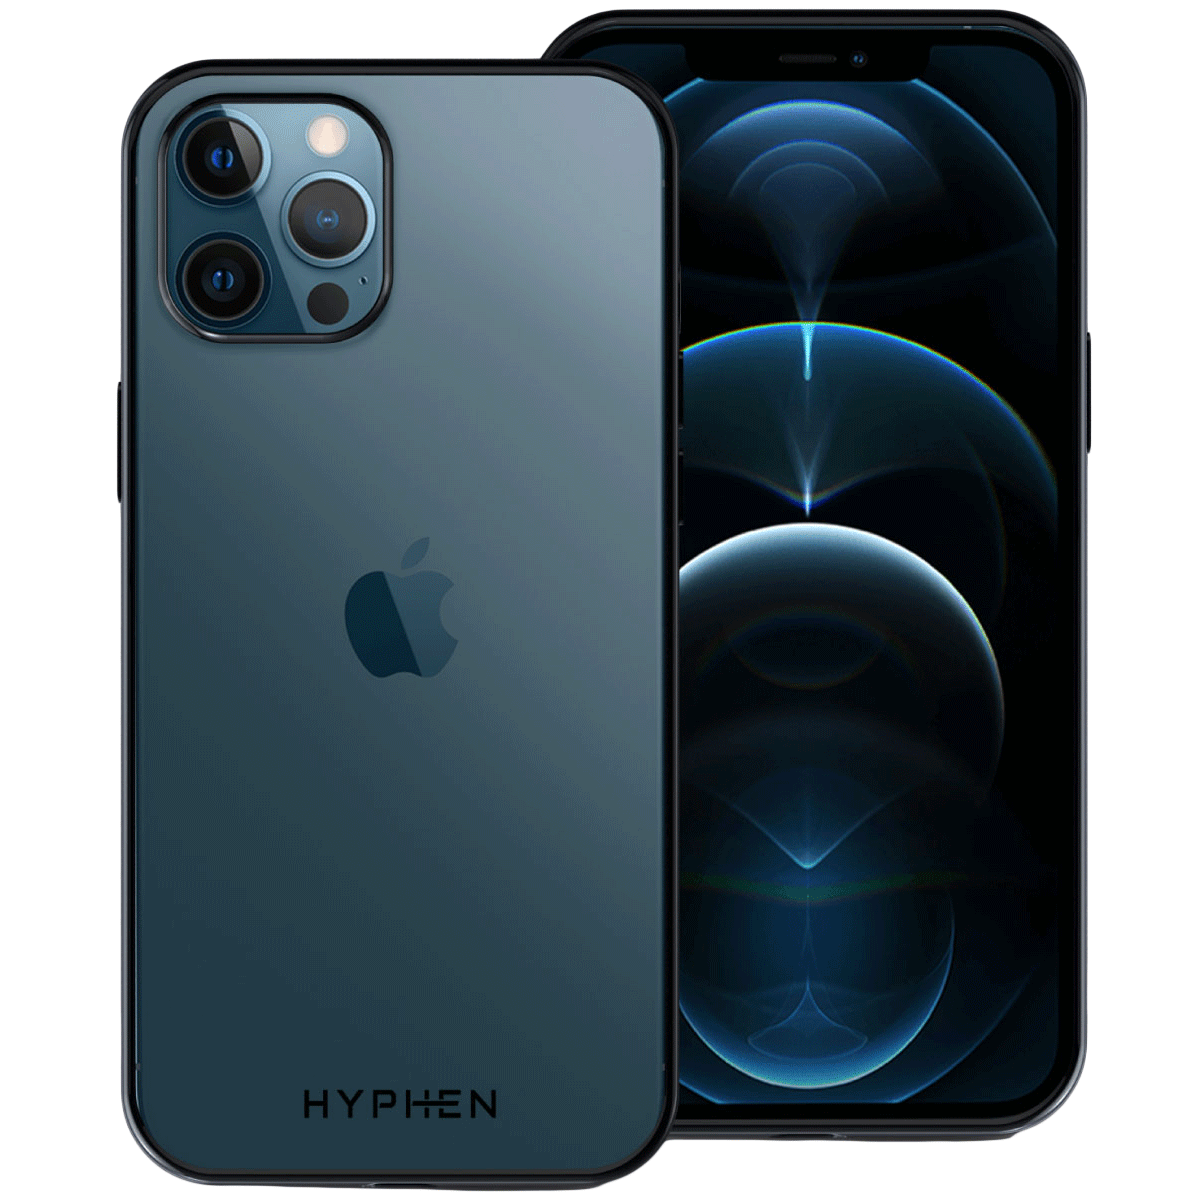 HYPHEN Frame TPU Back Cover for Apple iPhone 12 Pro Max (Compact, Flexible and Slim Design, Black)